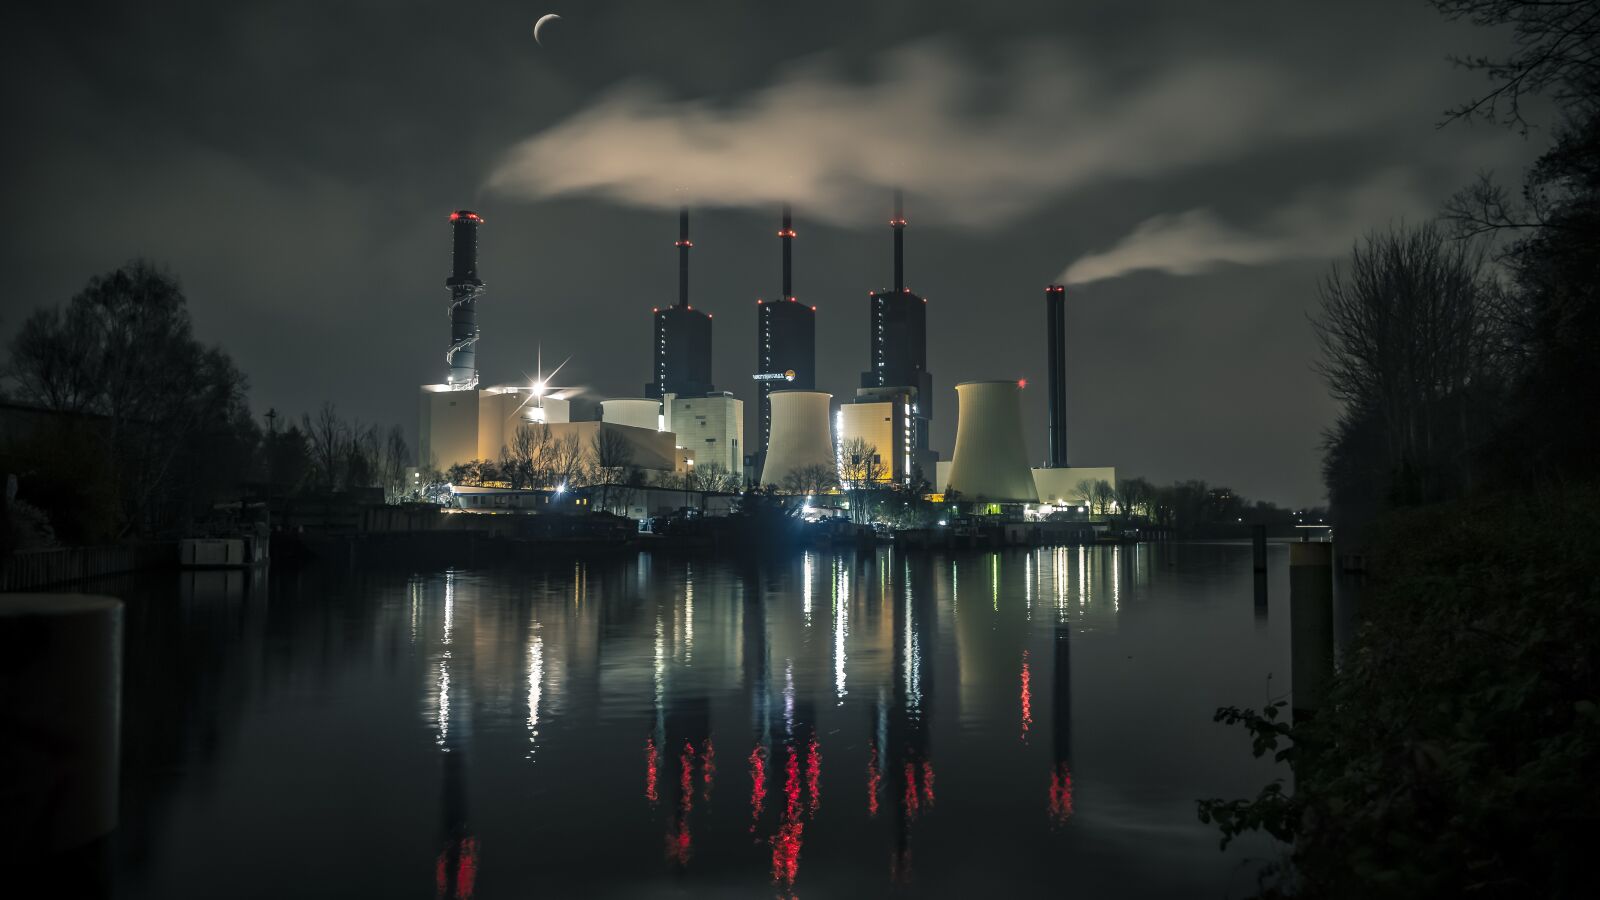 Sony a7 II sample photo. Power plant, water, mirroring photography